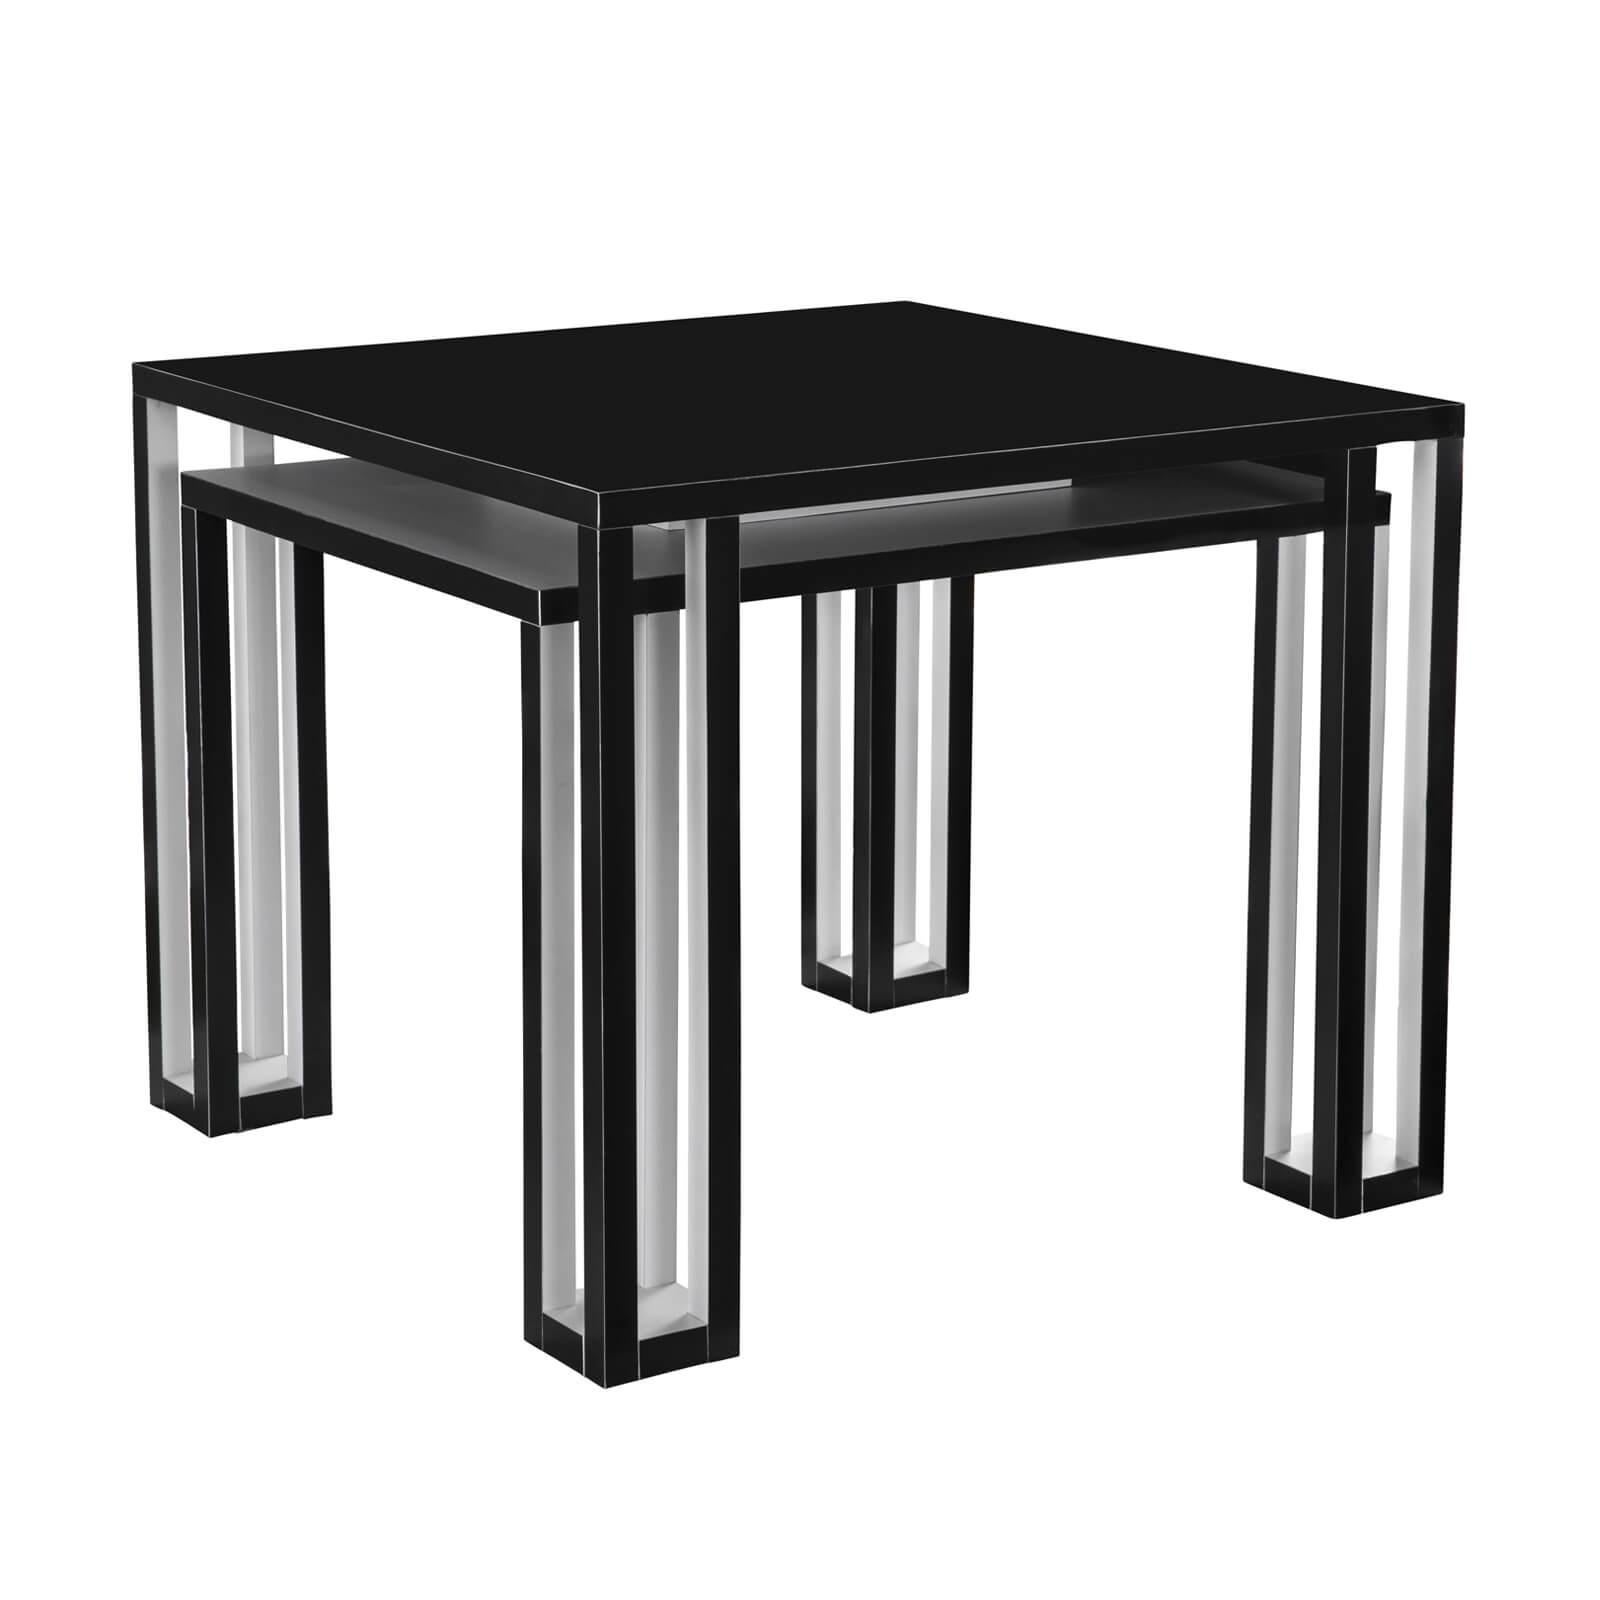 American Black & White Table For Sale